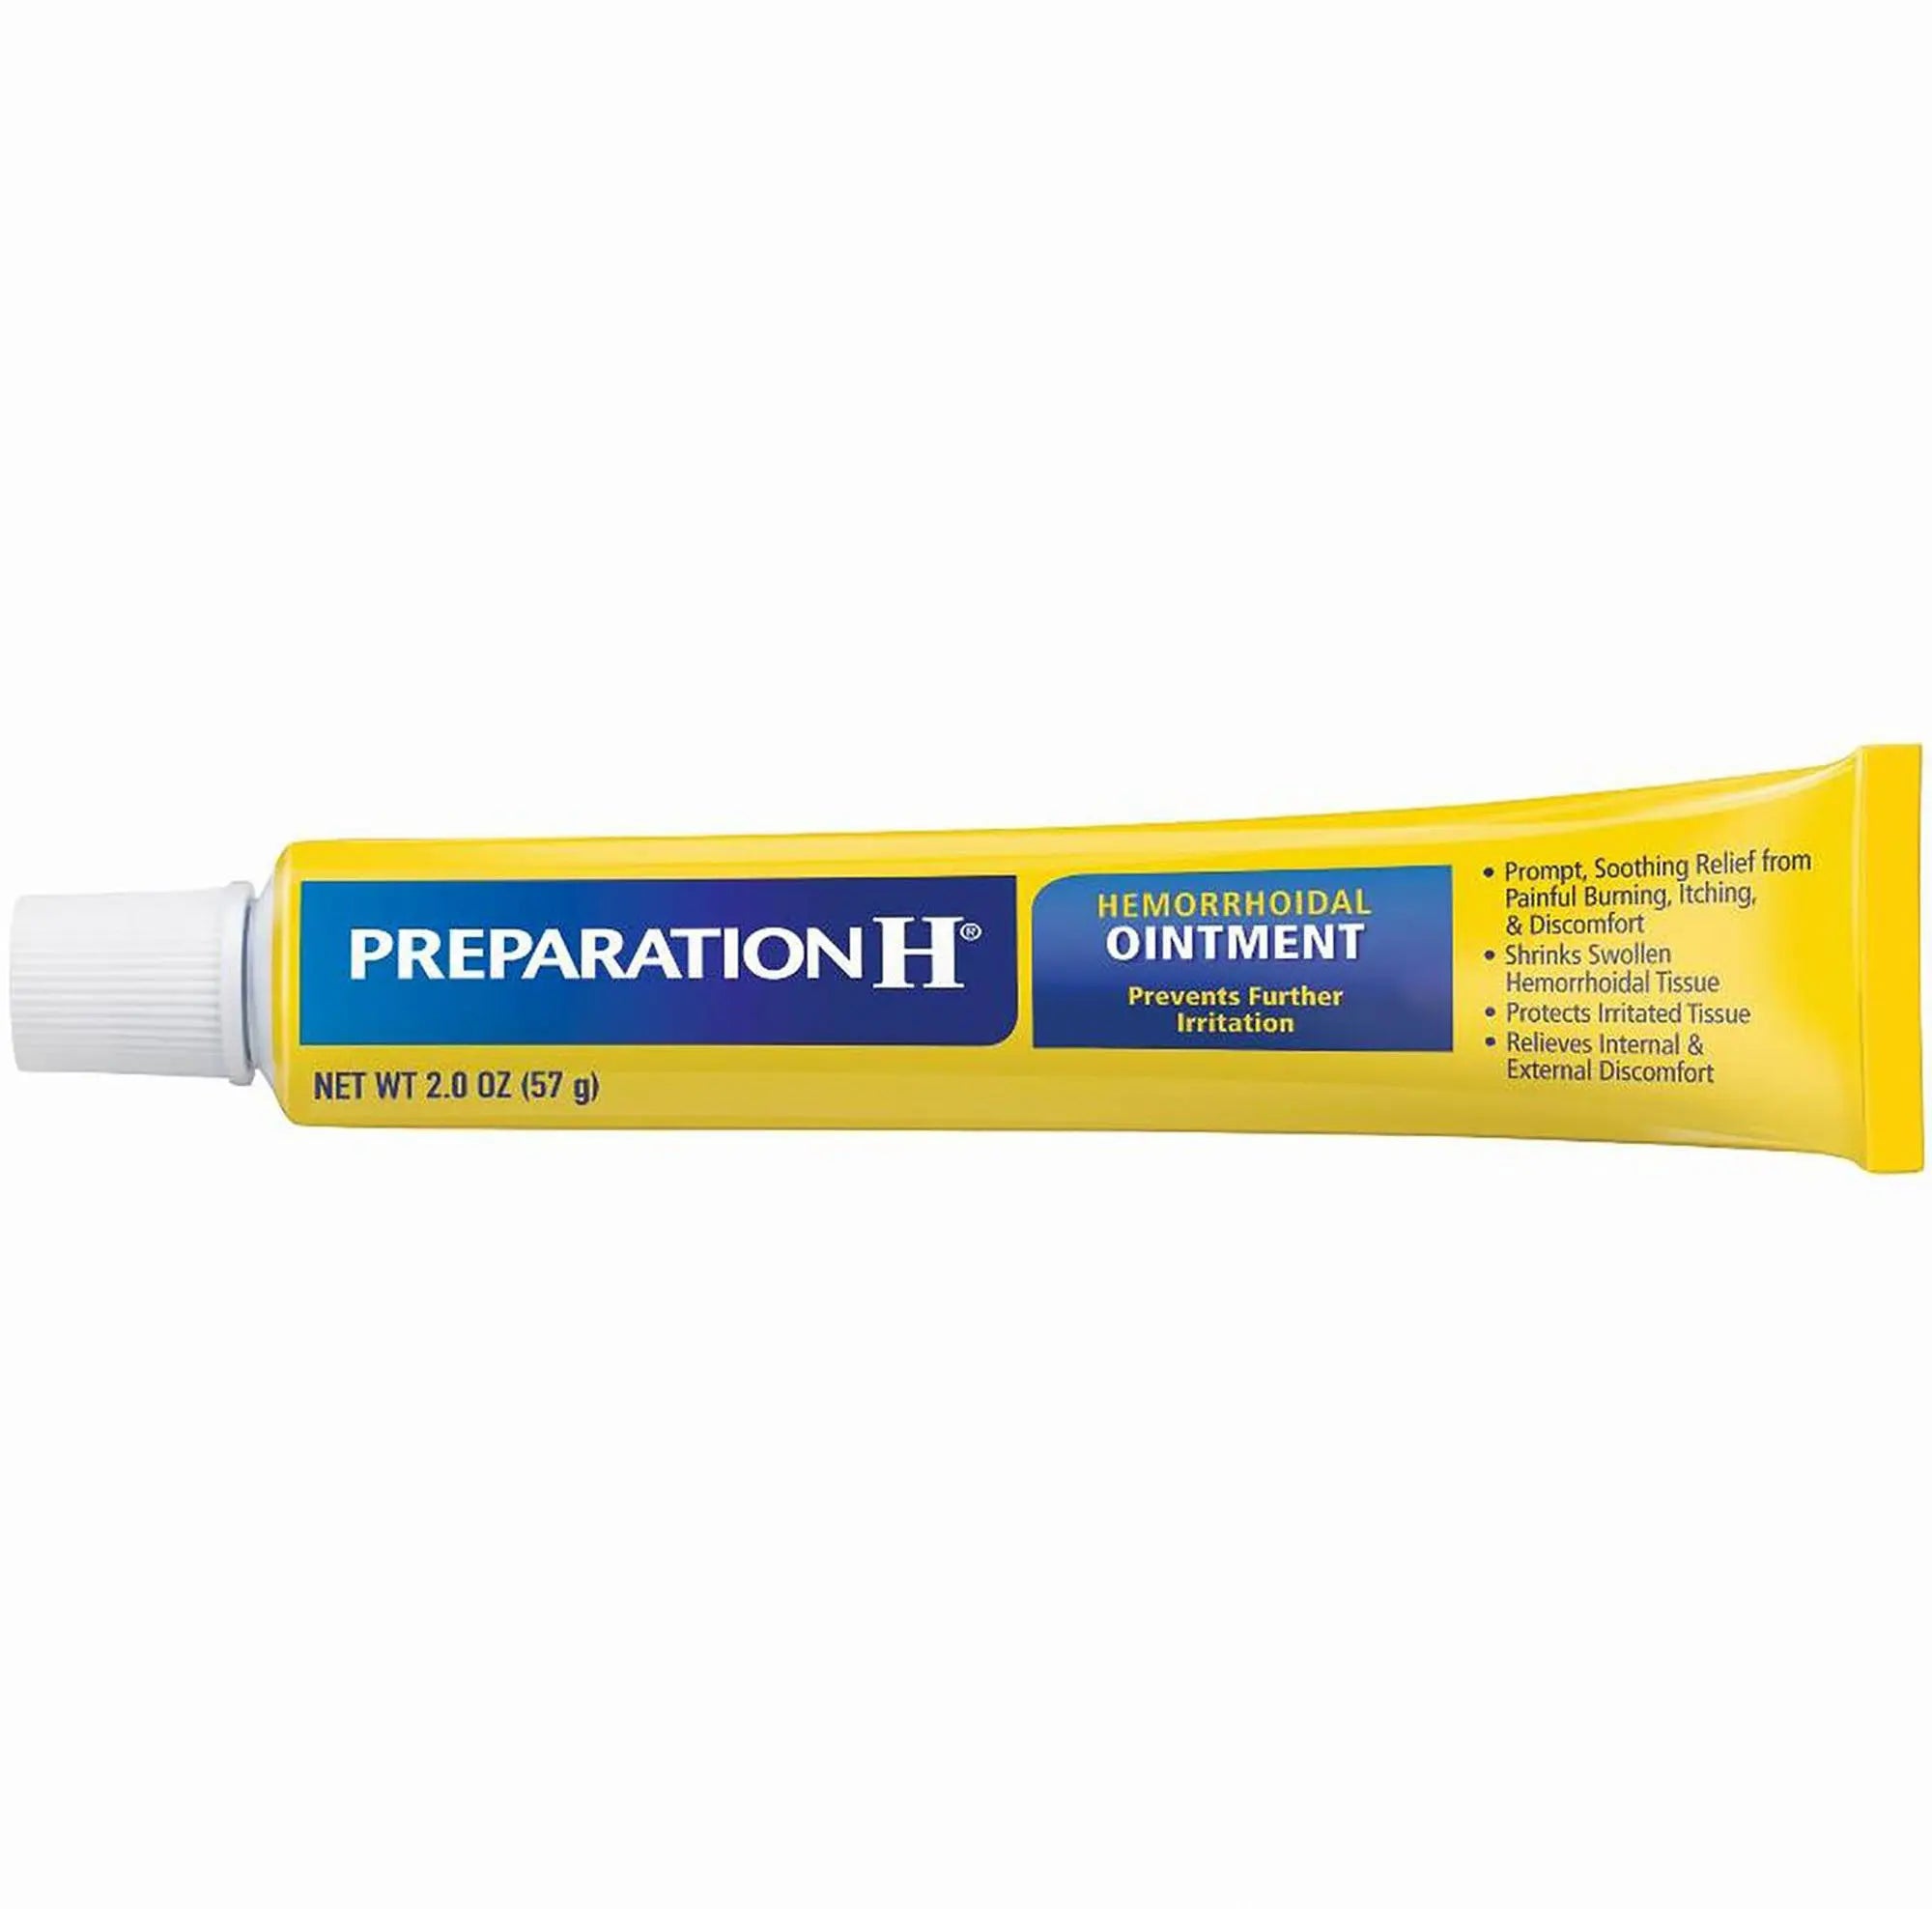 Preparation H Products for Fast Hemorrhoid Treatment